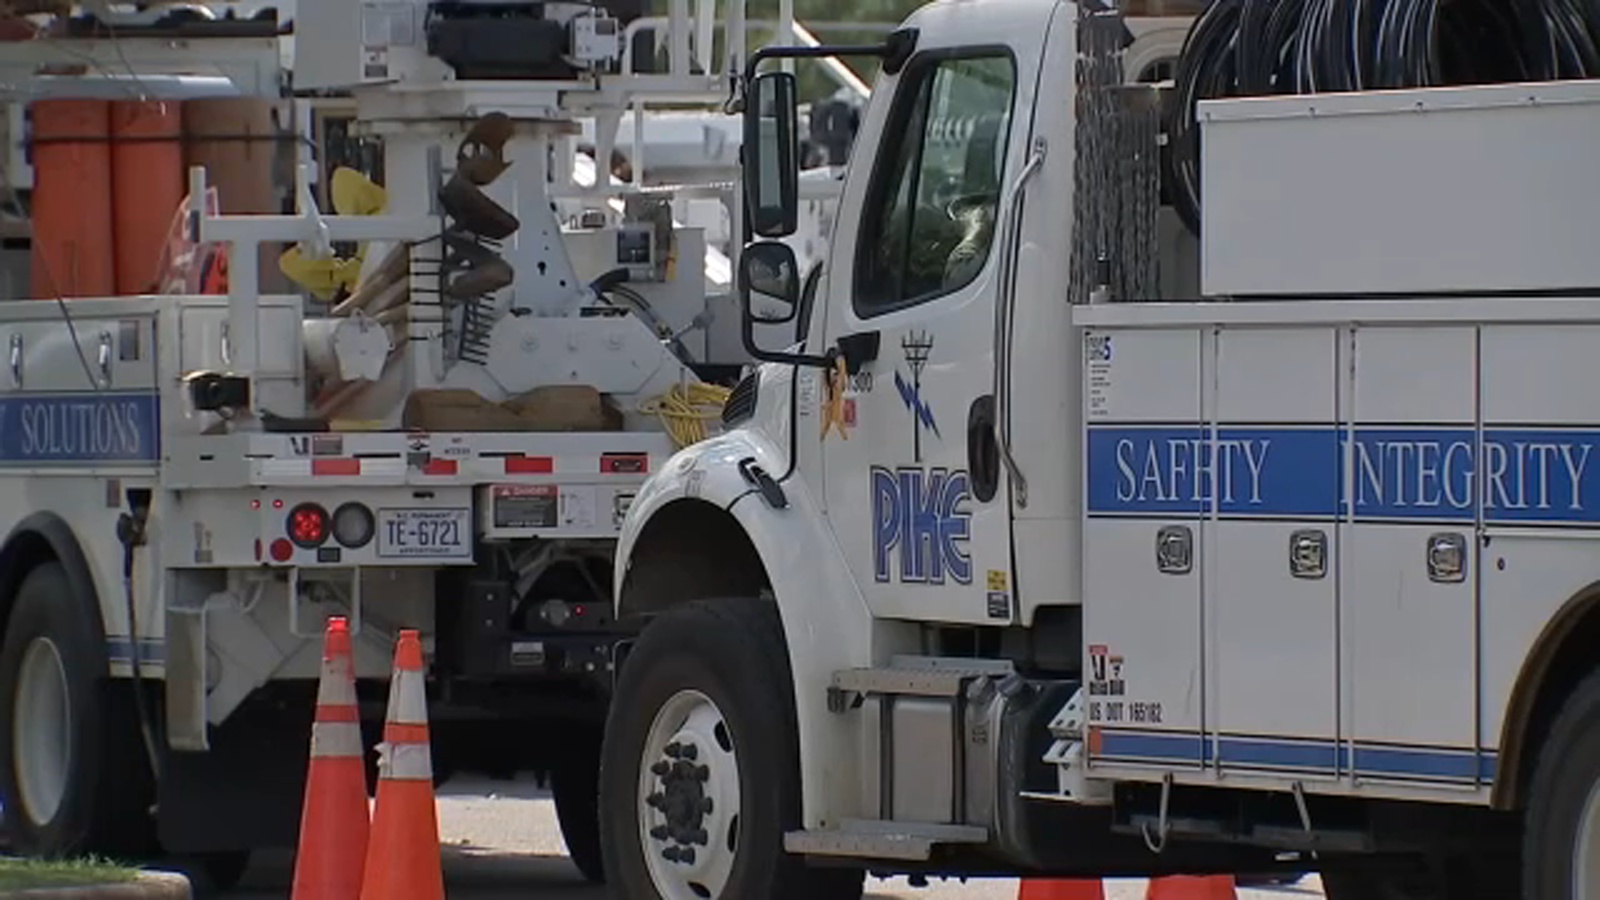 CenterPoint apologizes for power crisis and proposes action plan to work more efficiently after botched Beryl response [Video]